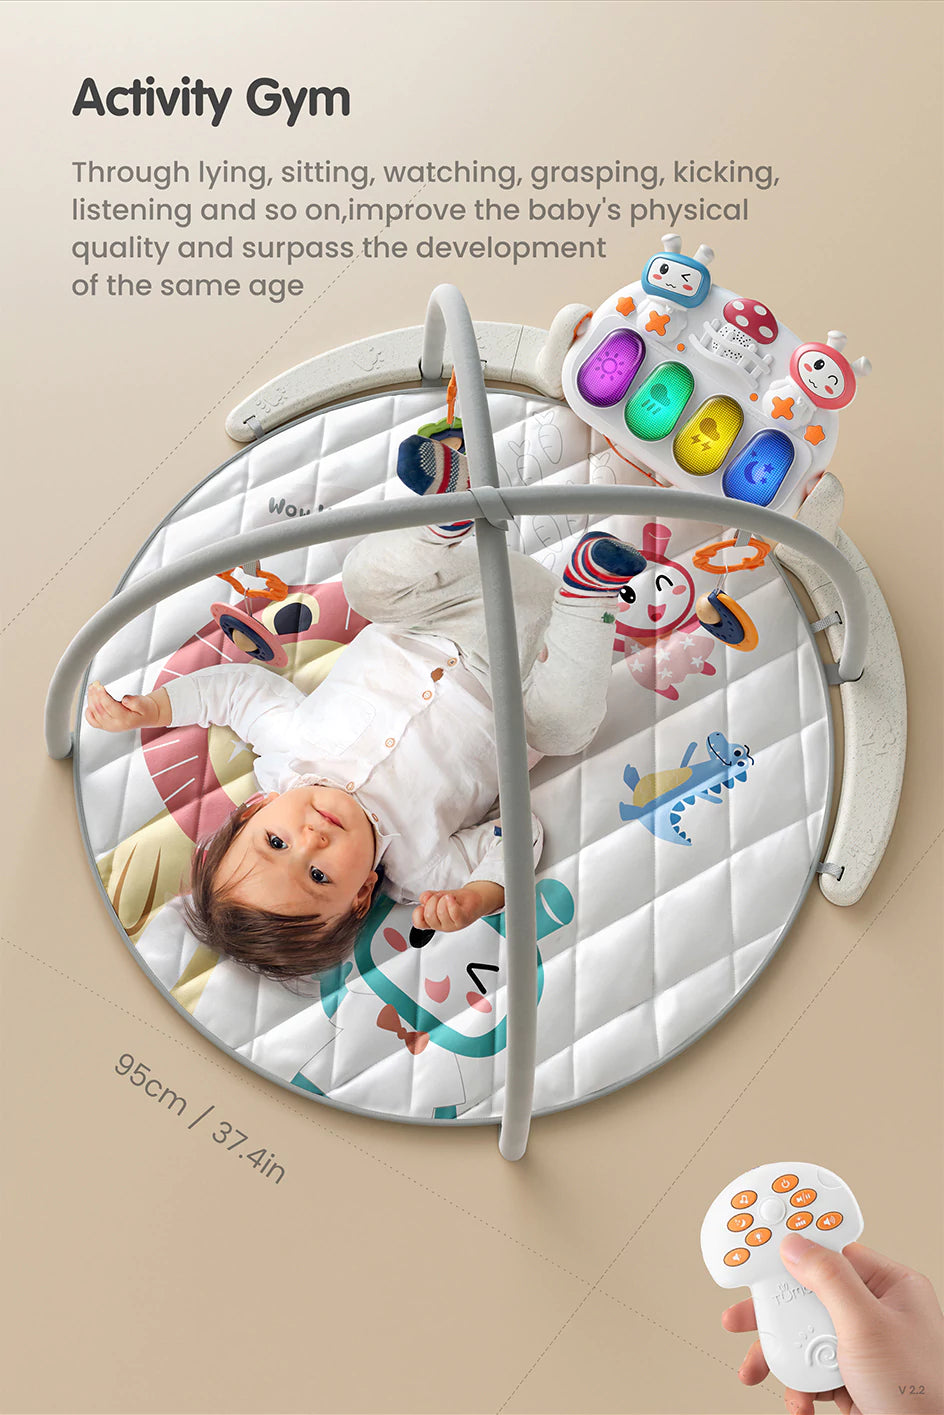 Remote operated baby gym with piano Activity Gym